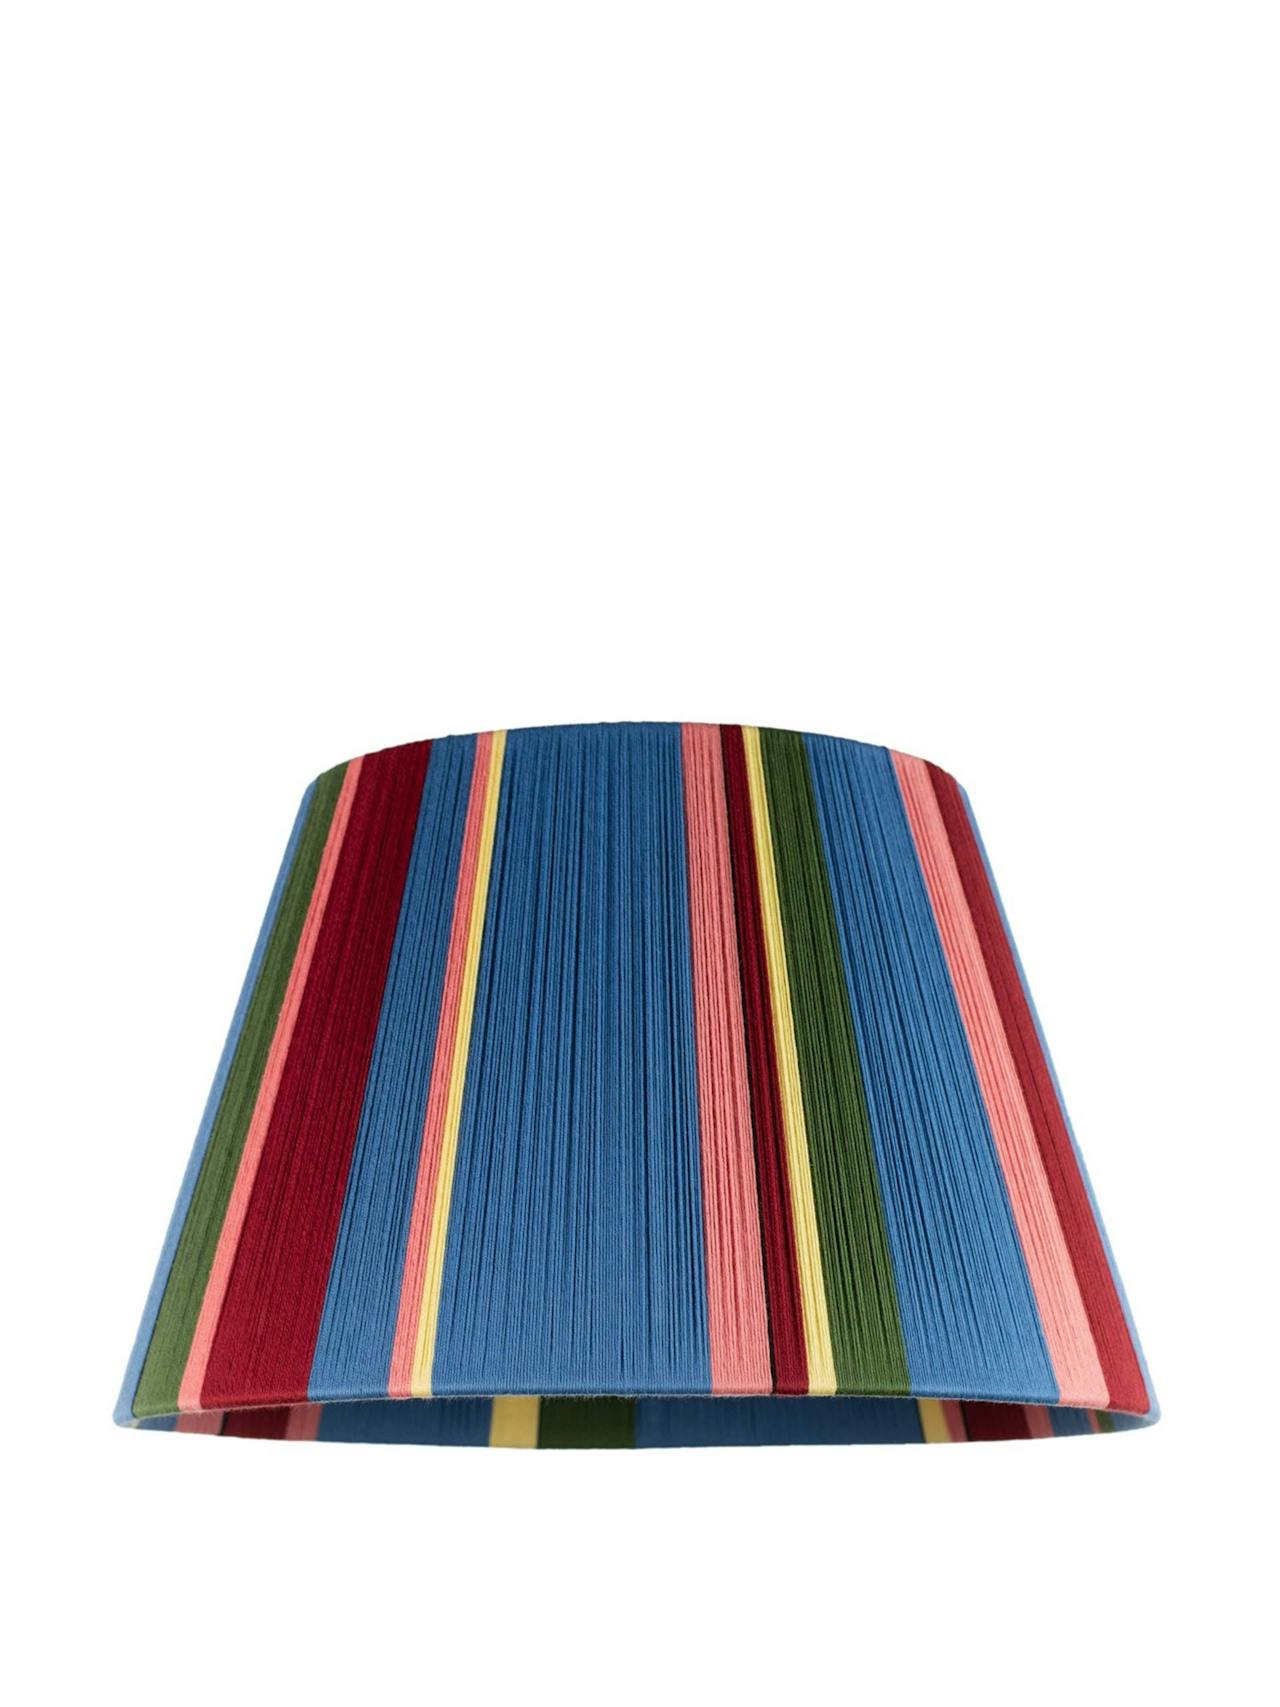 Jean French drum lampshade